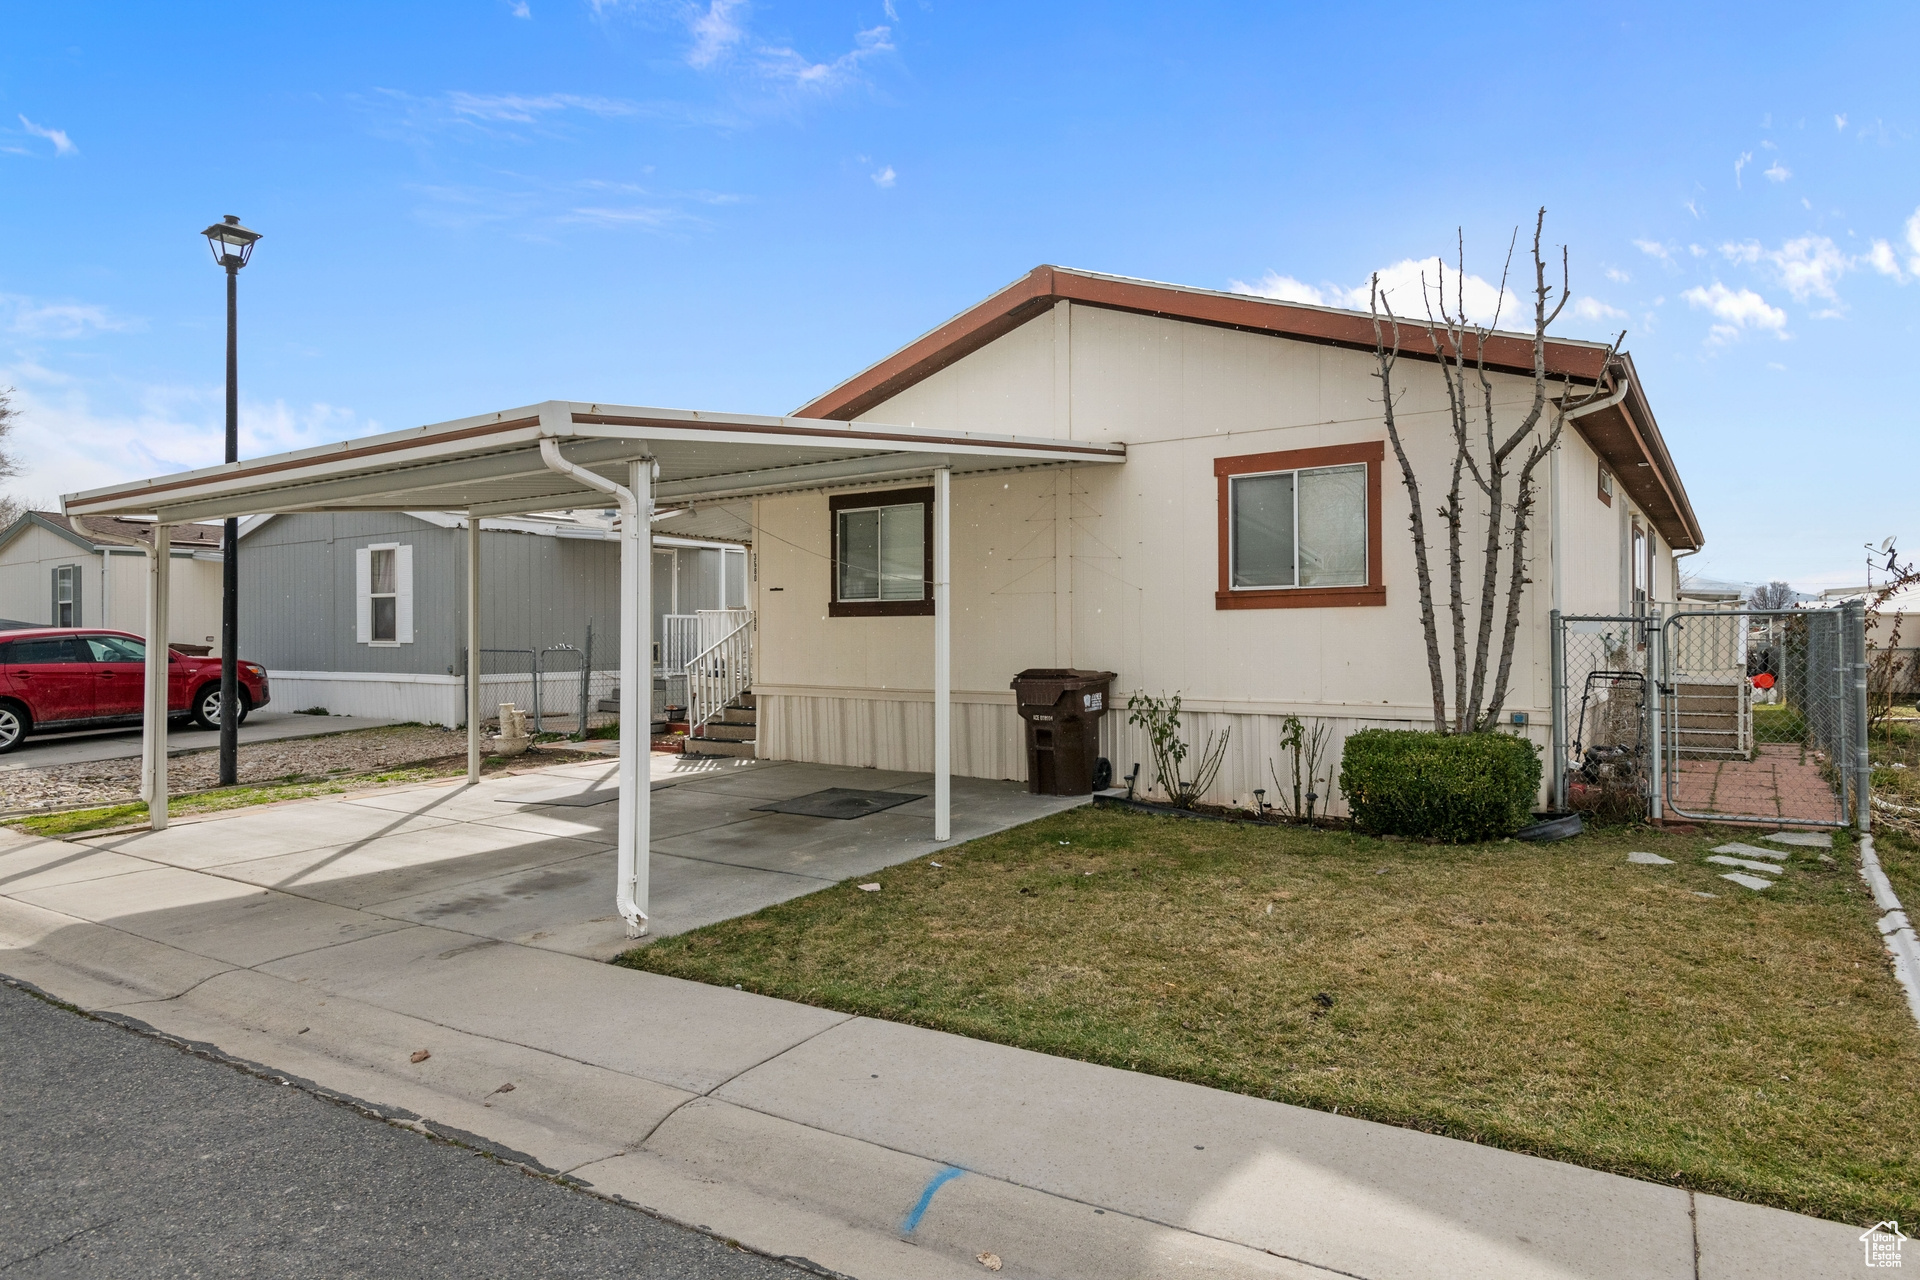 3680 S RIVER HORSE, West Valley City, Utah 84119, 3 Bedrooms Bedrooms, 9 Rooms Rooms,2 BathroomsBathrooms,Residential,For sale,RIVER HORSE,1985174